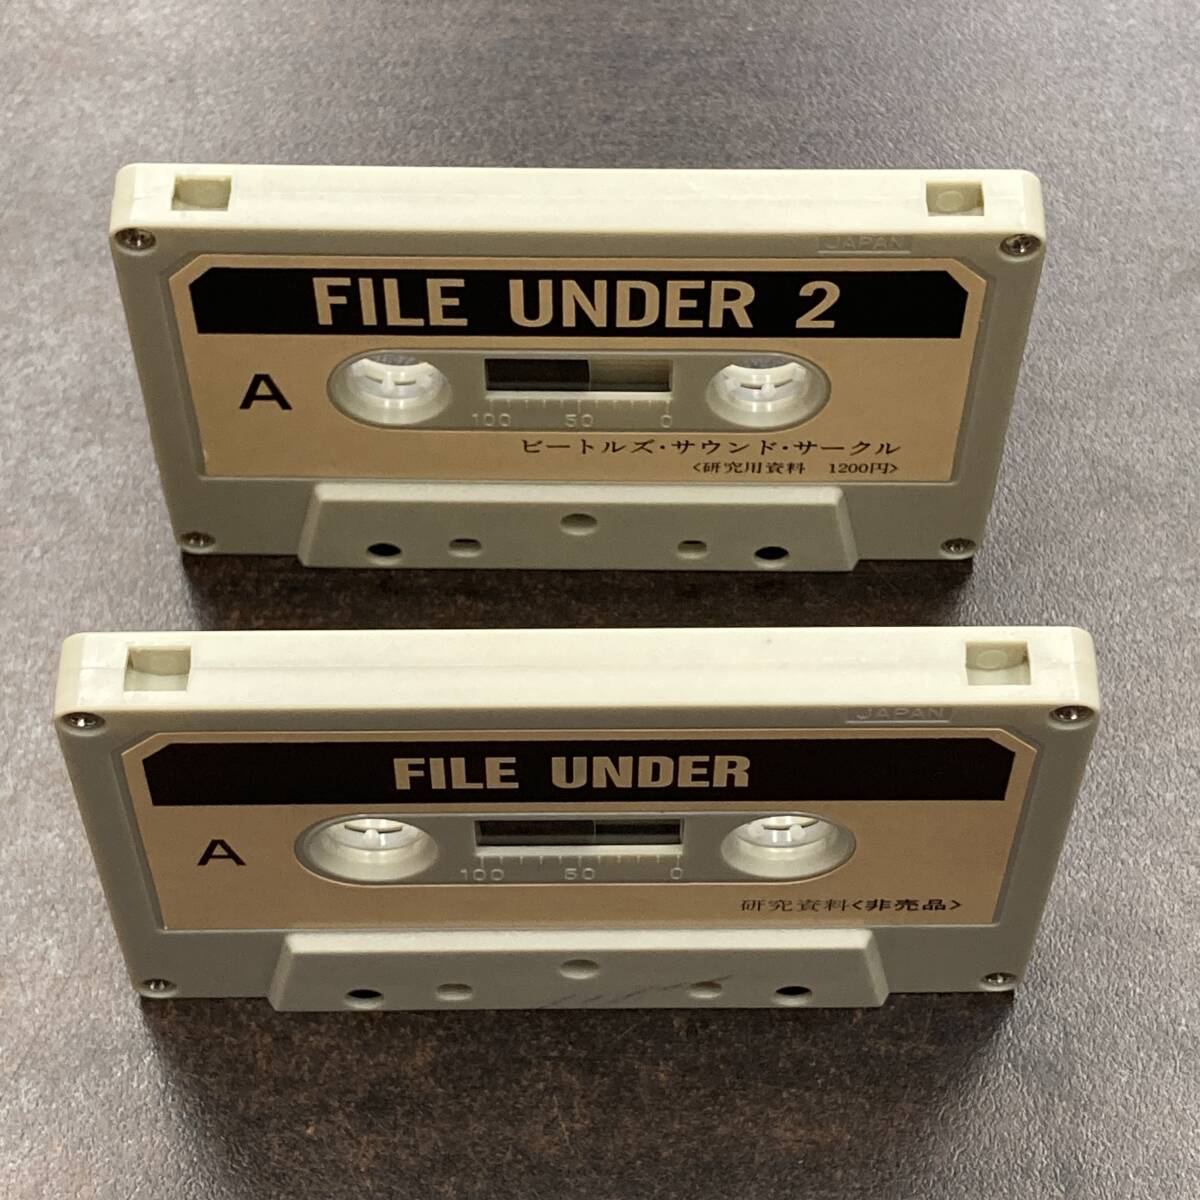 1212M ザ・ビートルズ 研究資料 FILE UNDER 1-2 カセットテープ / THE BEATLES Research materials Cassette Tapeの画像2